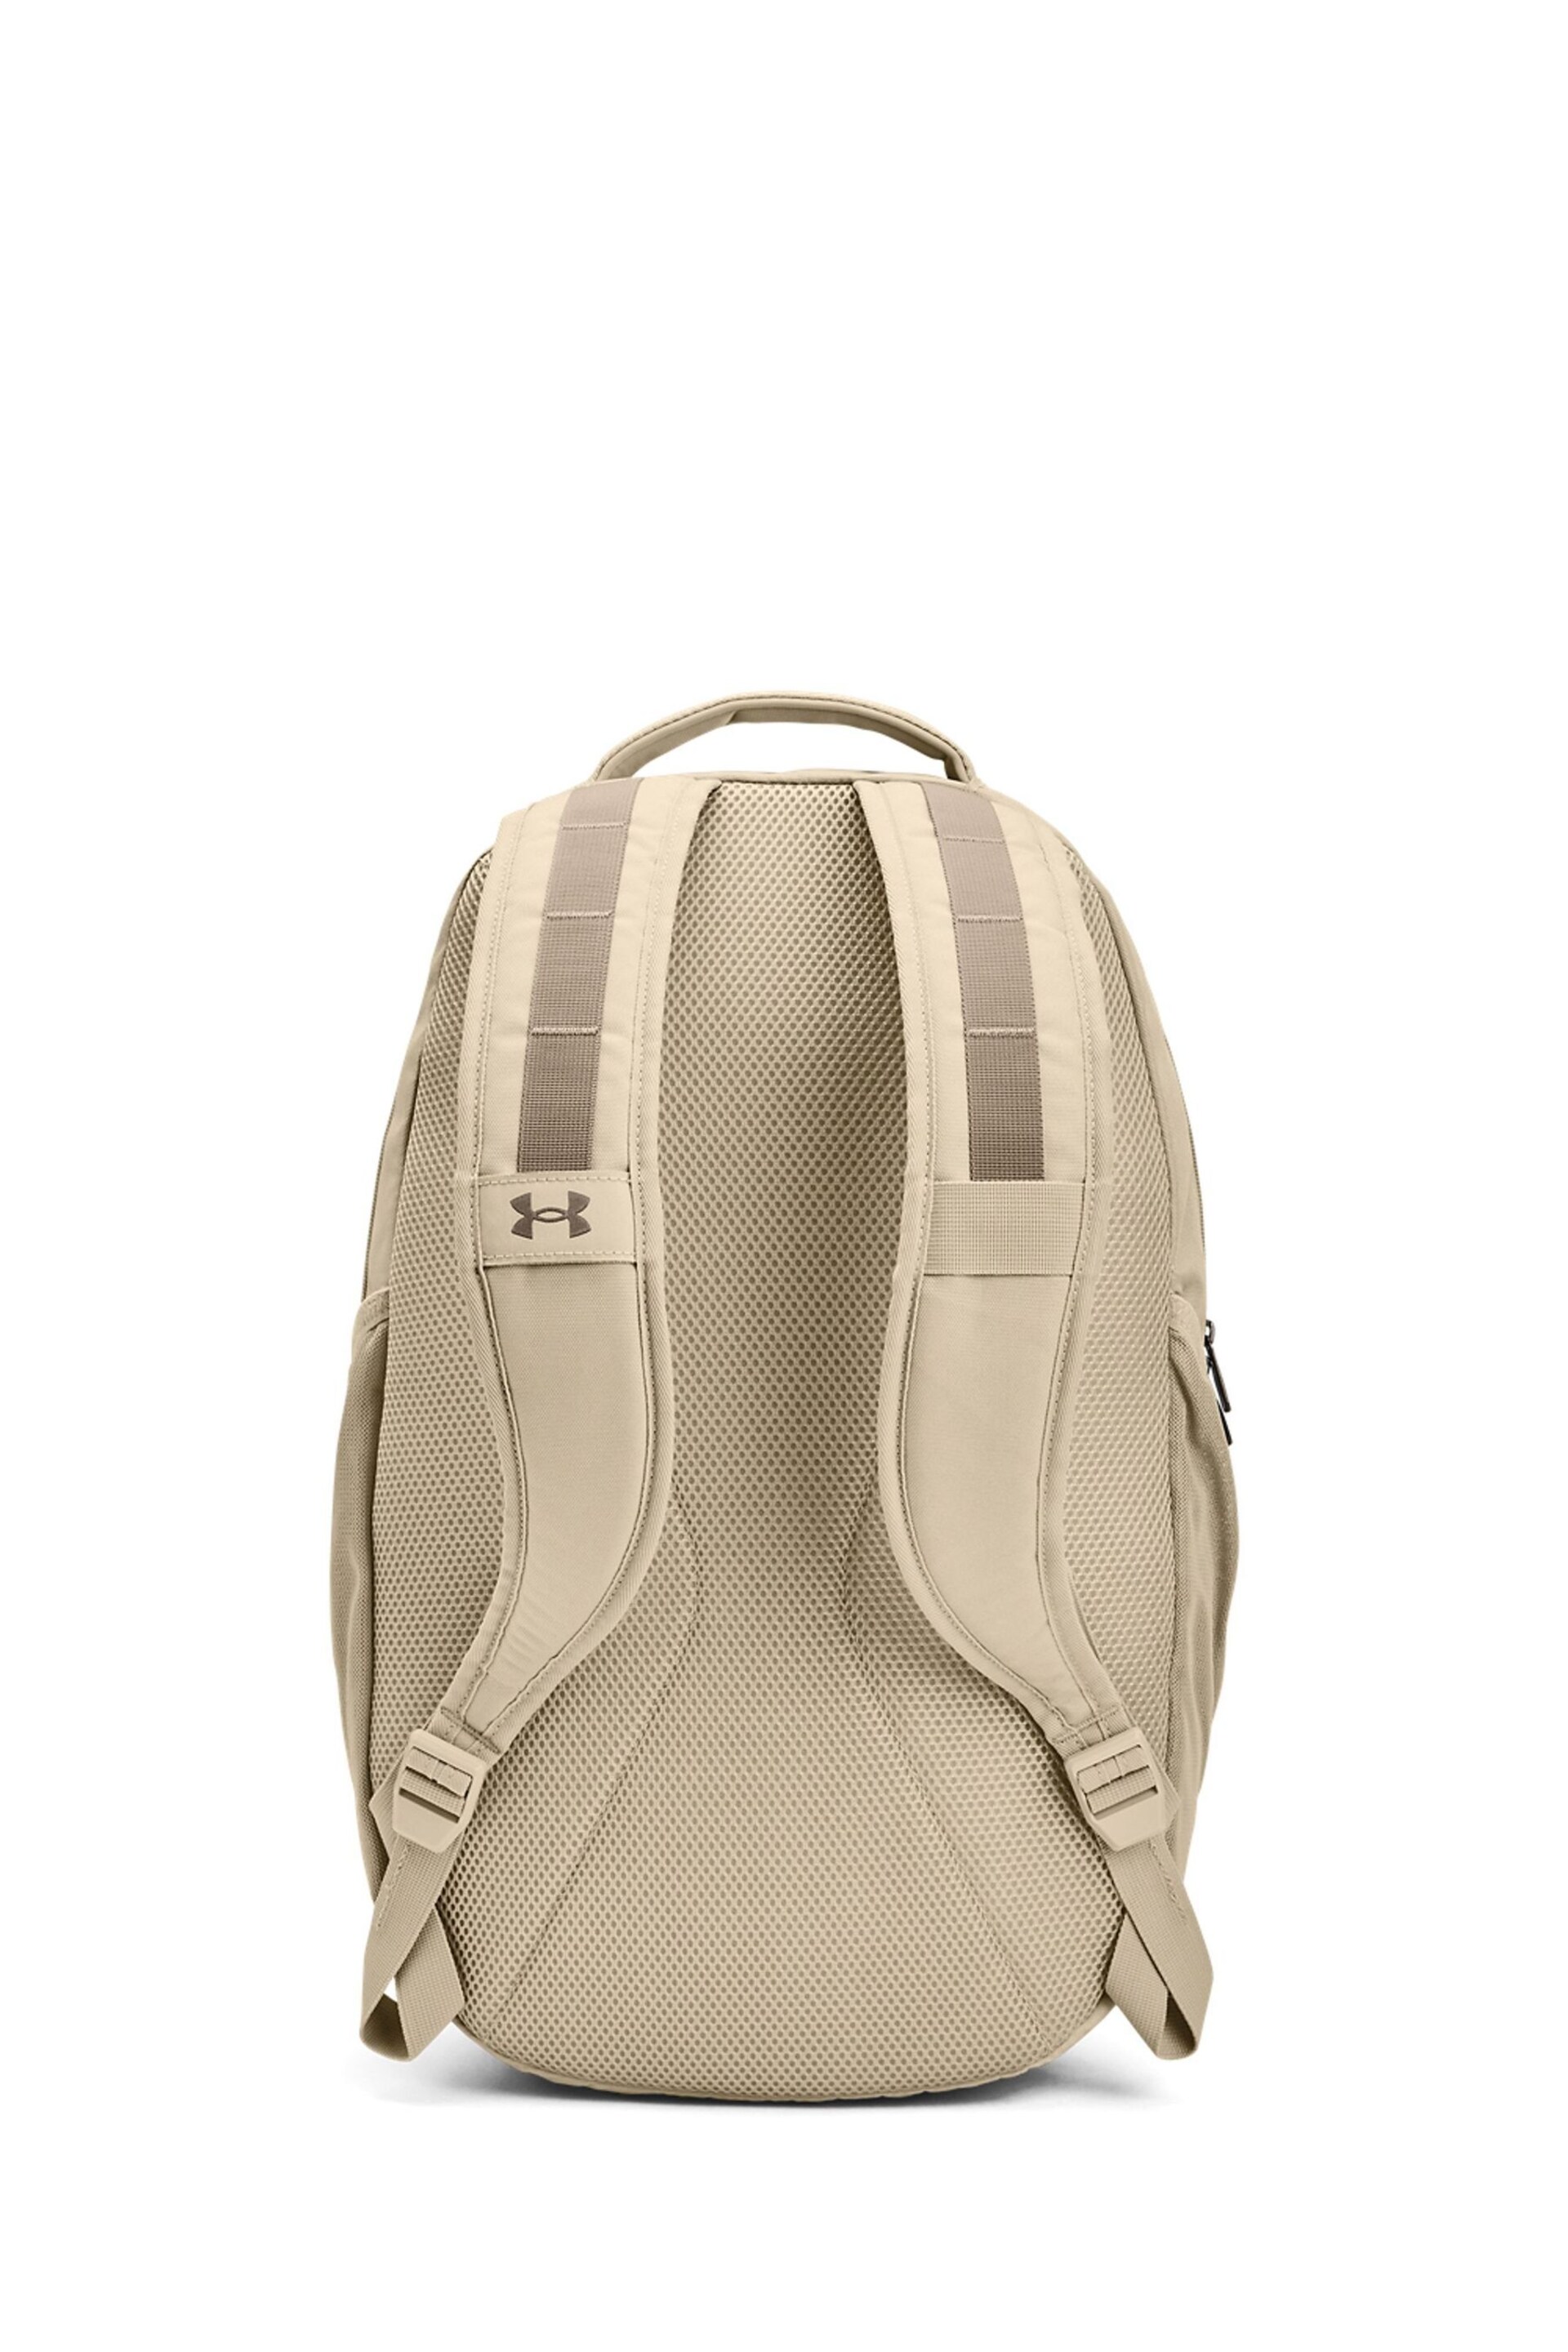 Under Armour Green Hustle 5 Backpack - Image 2 of 5